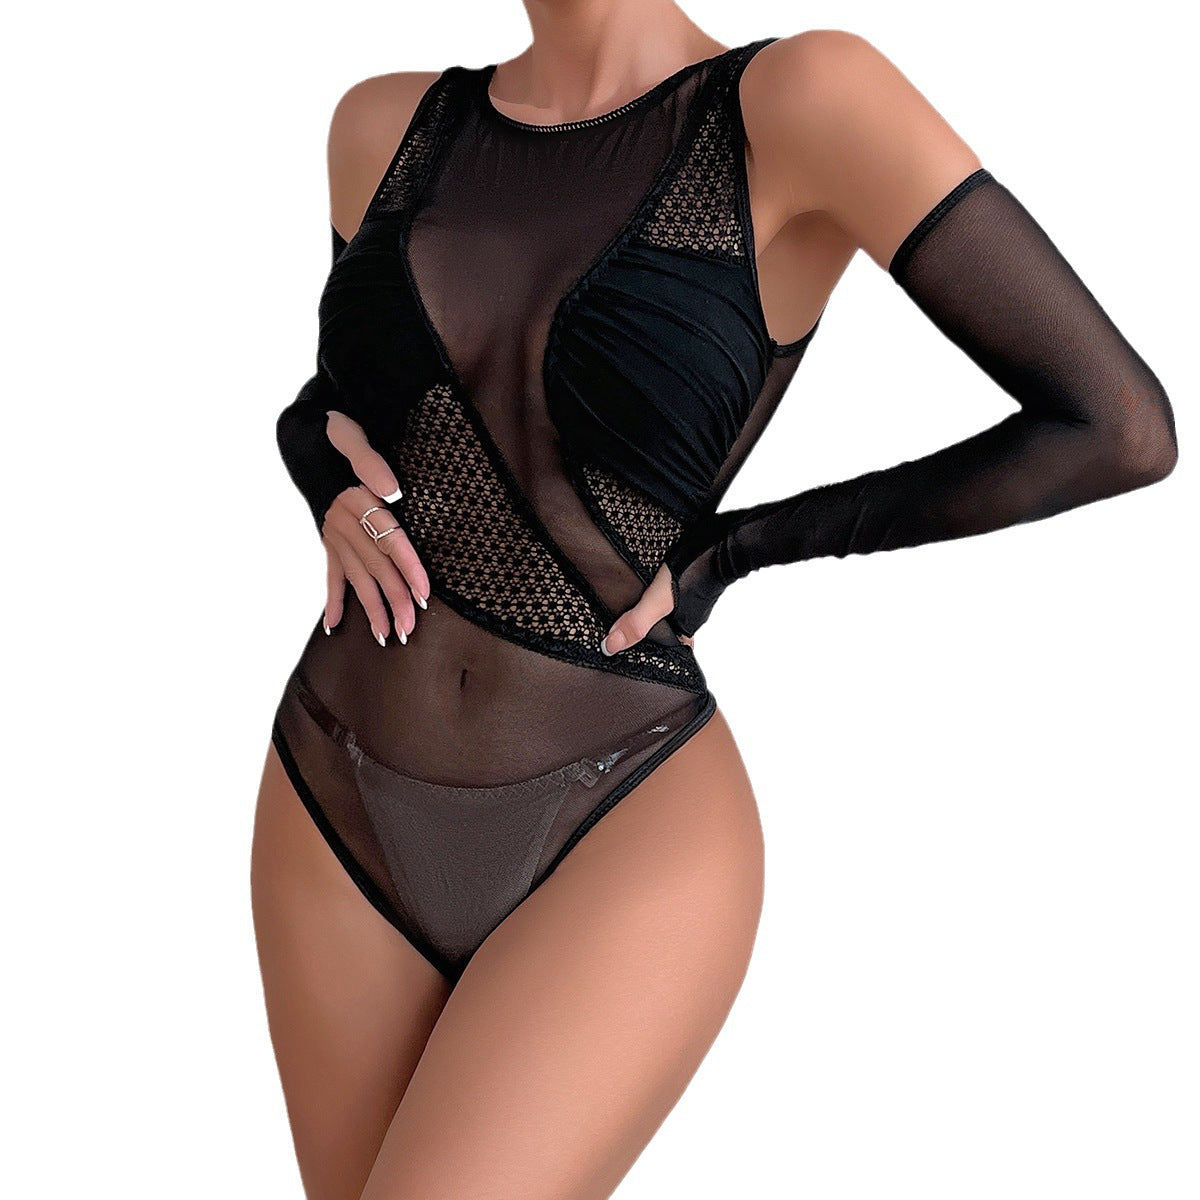 Irregular Design Lace Hollow Sheer Unique Bodysuit with Artistic Appeal